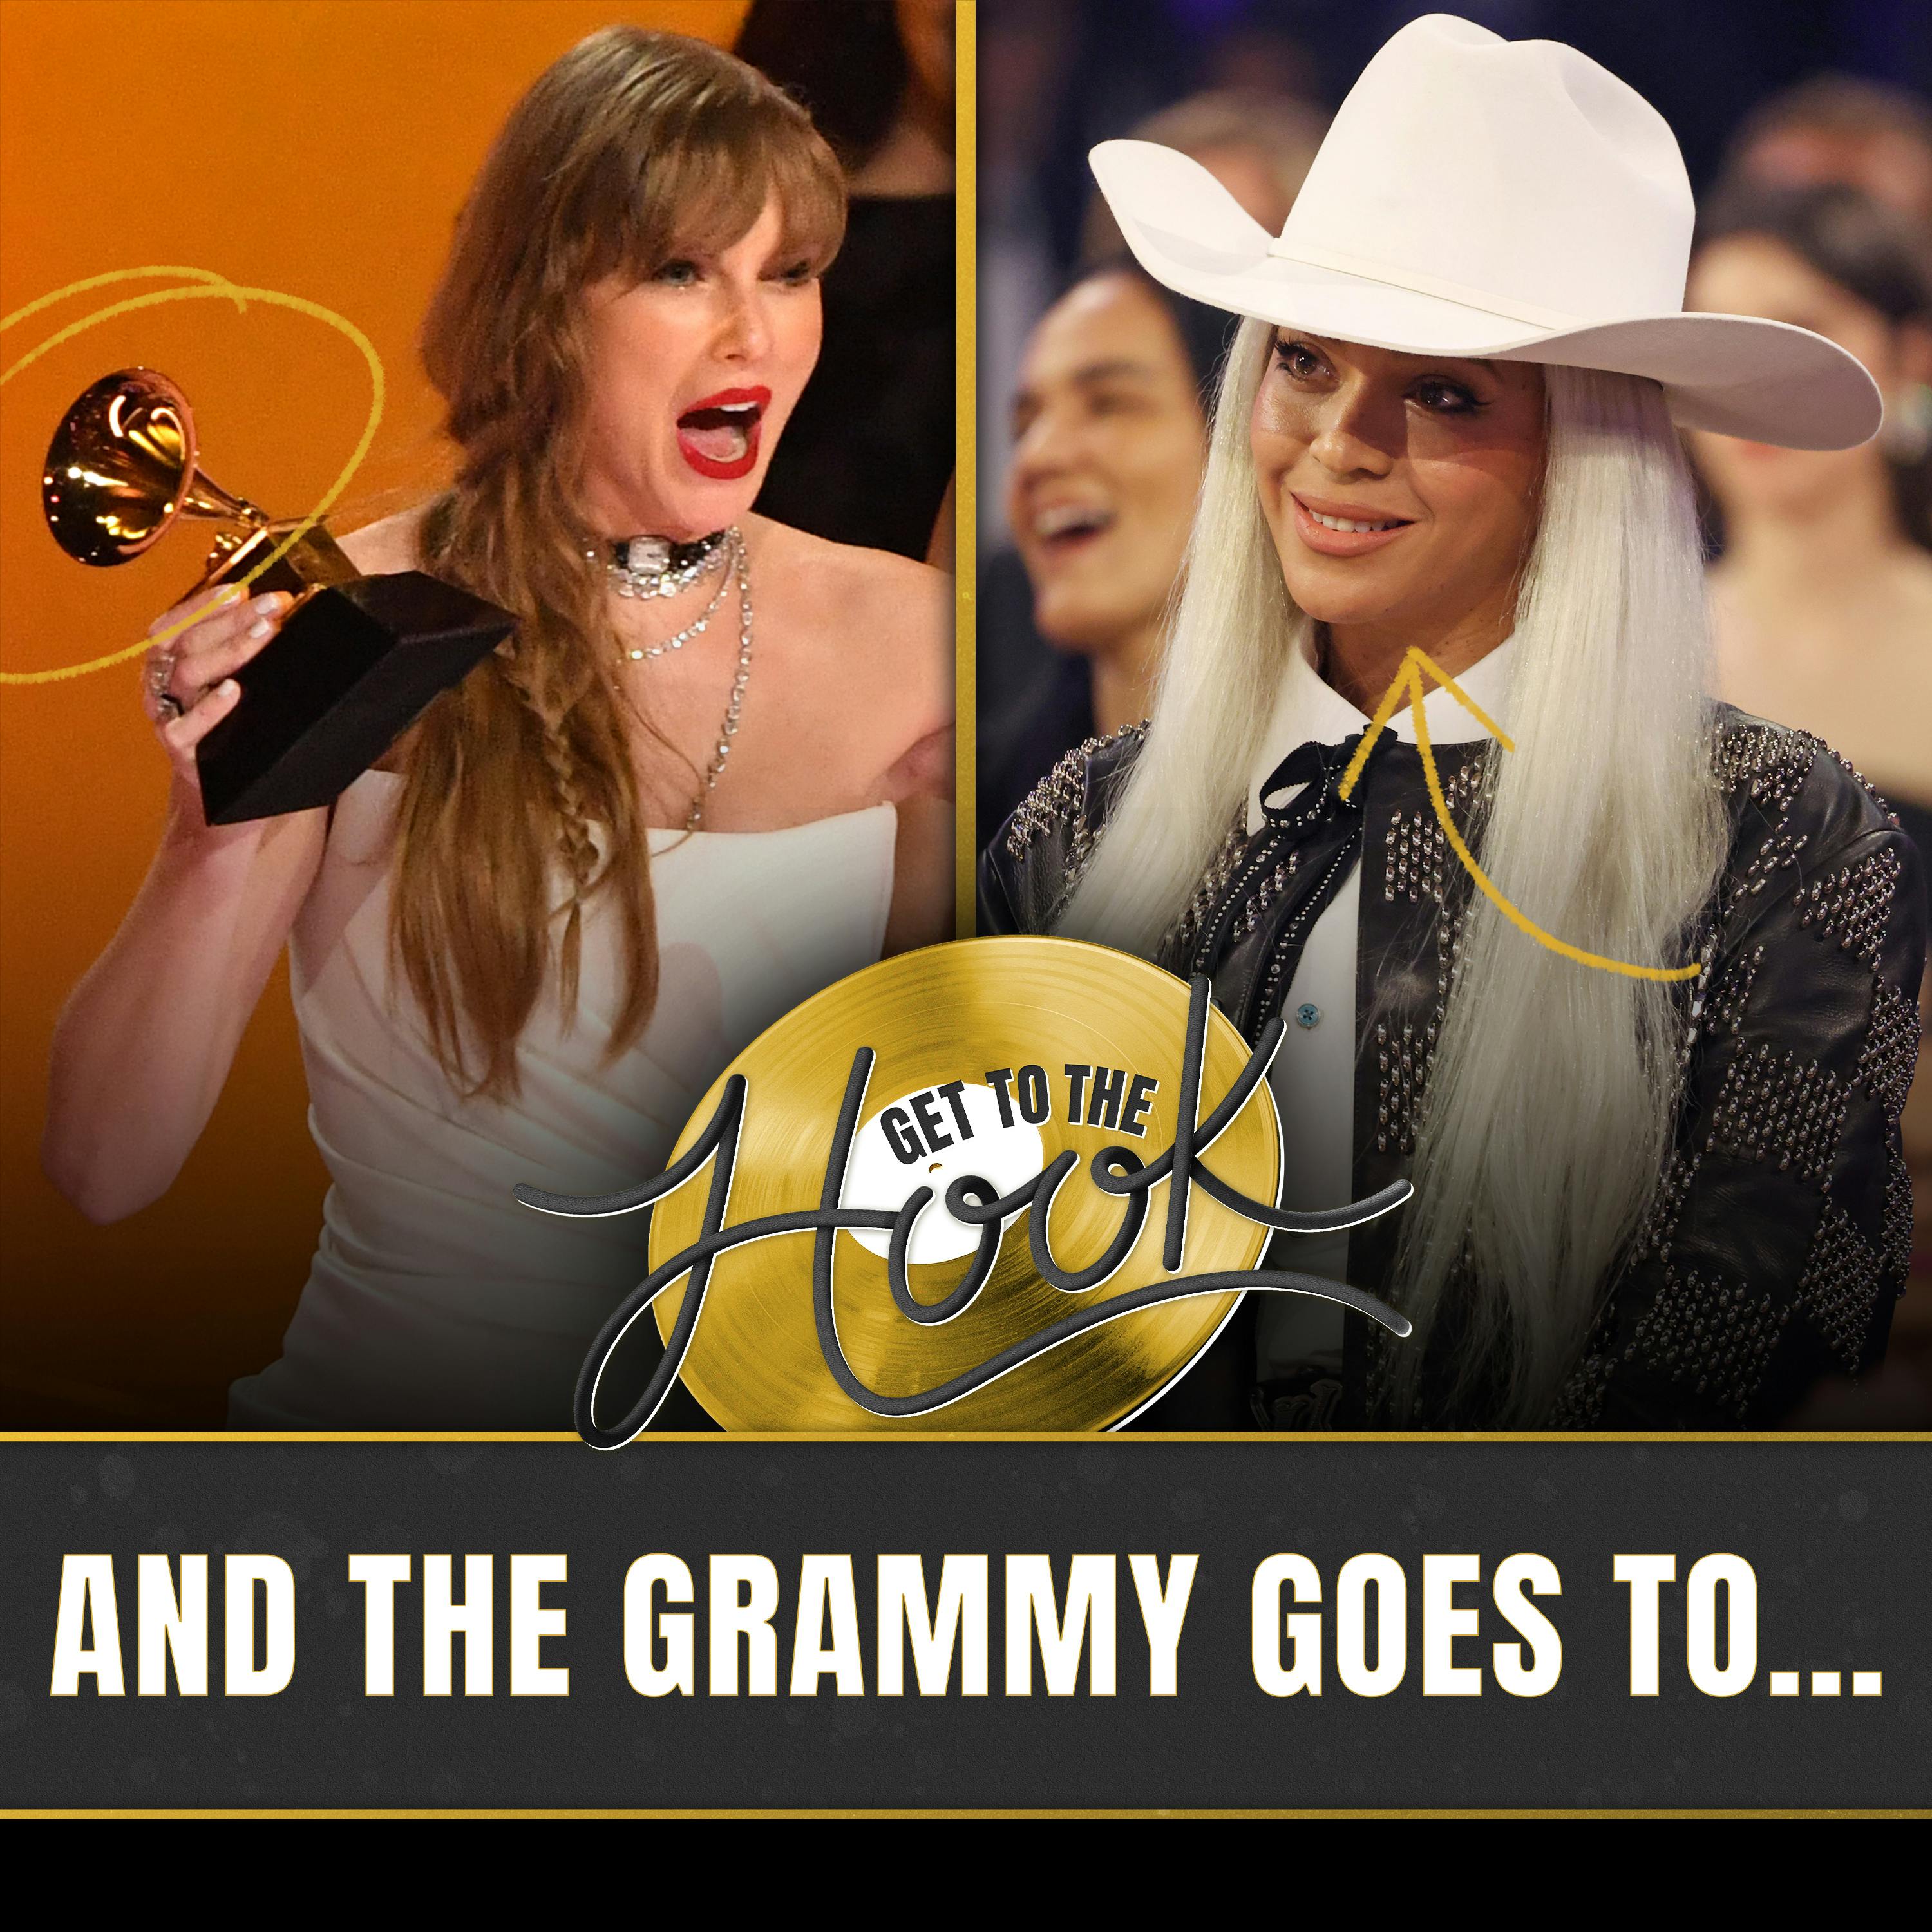 And The Grammy Goes To...